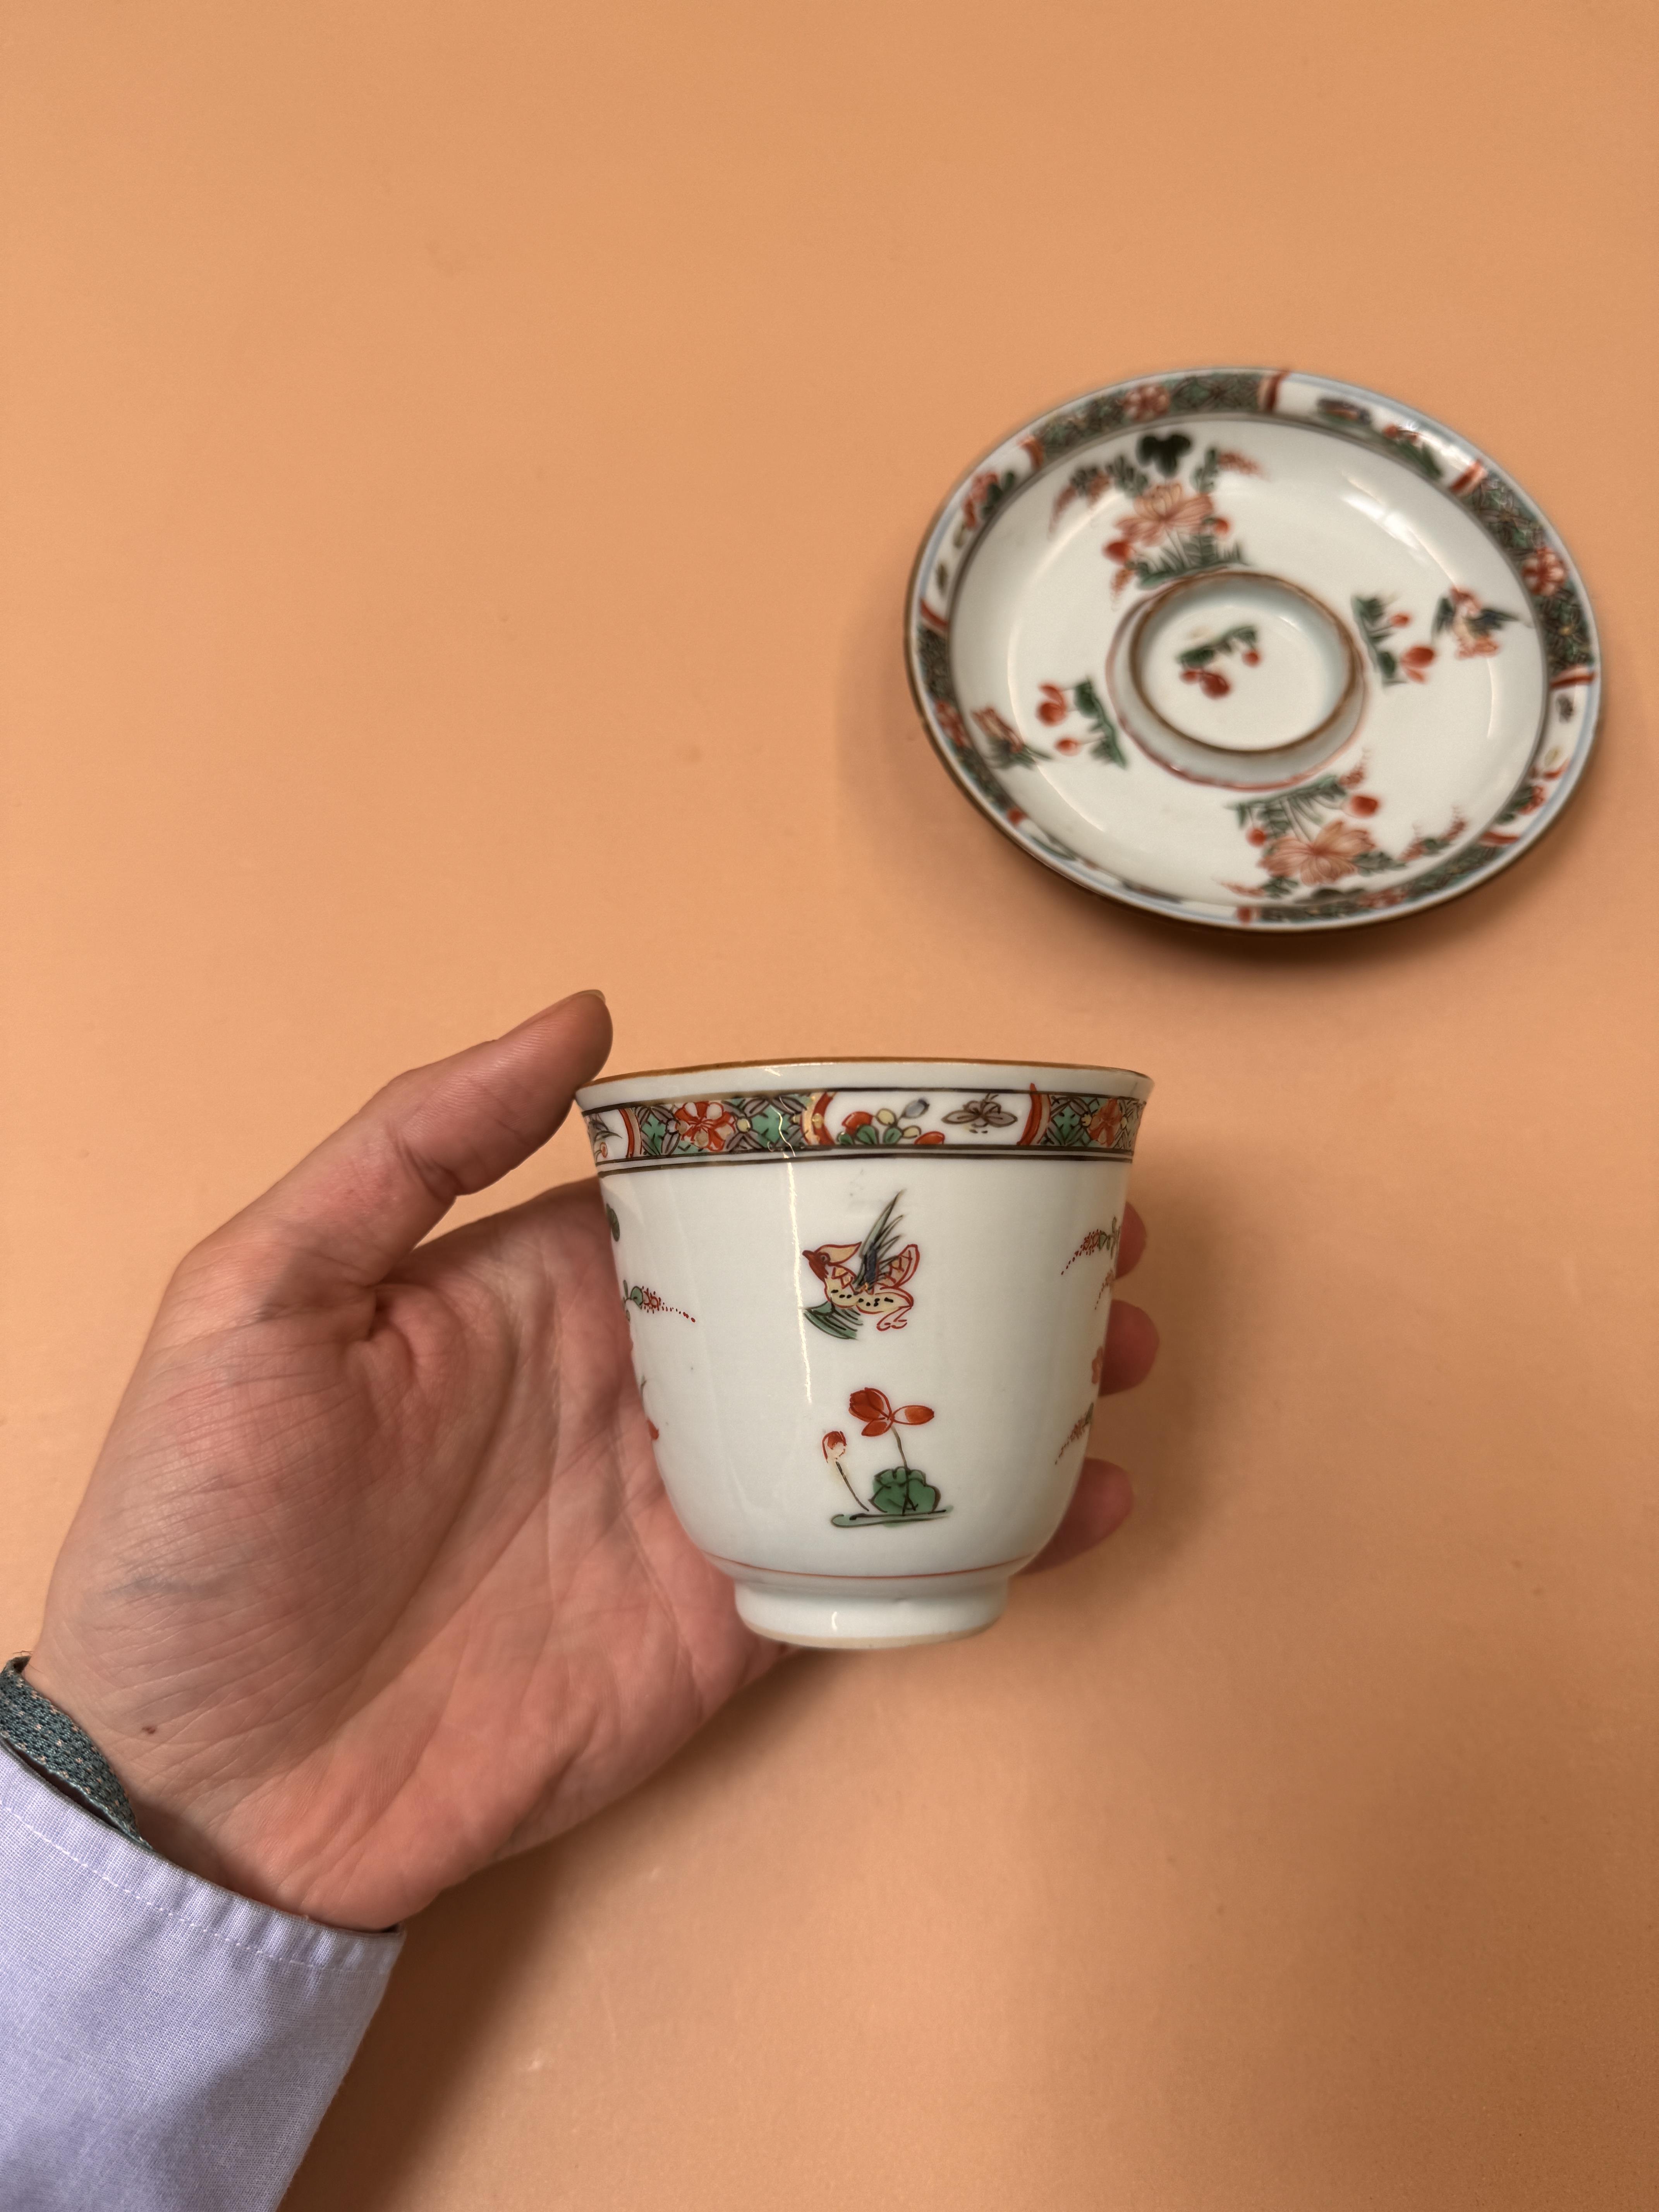 A CHINESE FAMILLE-VERTE CUP AND SAUCER 清康熙 五彩花鳥圖盃連盤 - Image 5 of 18